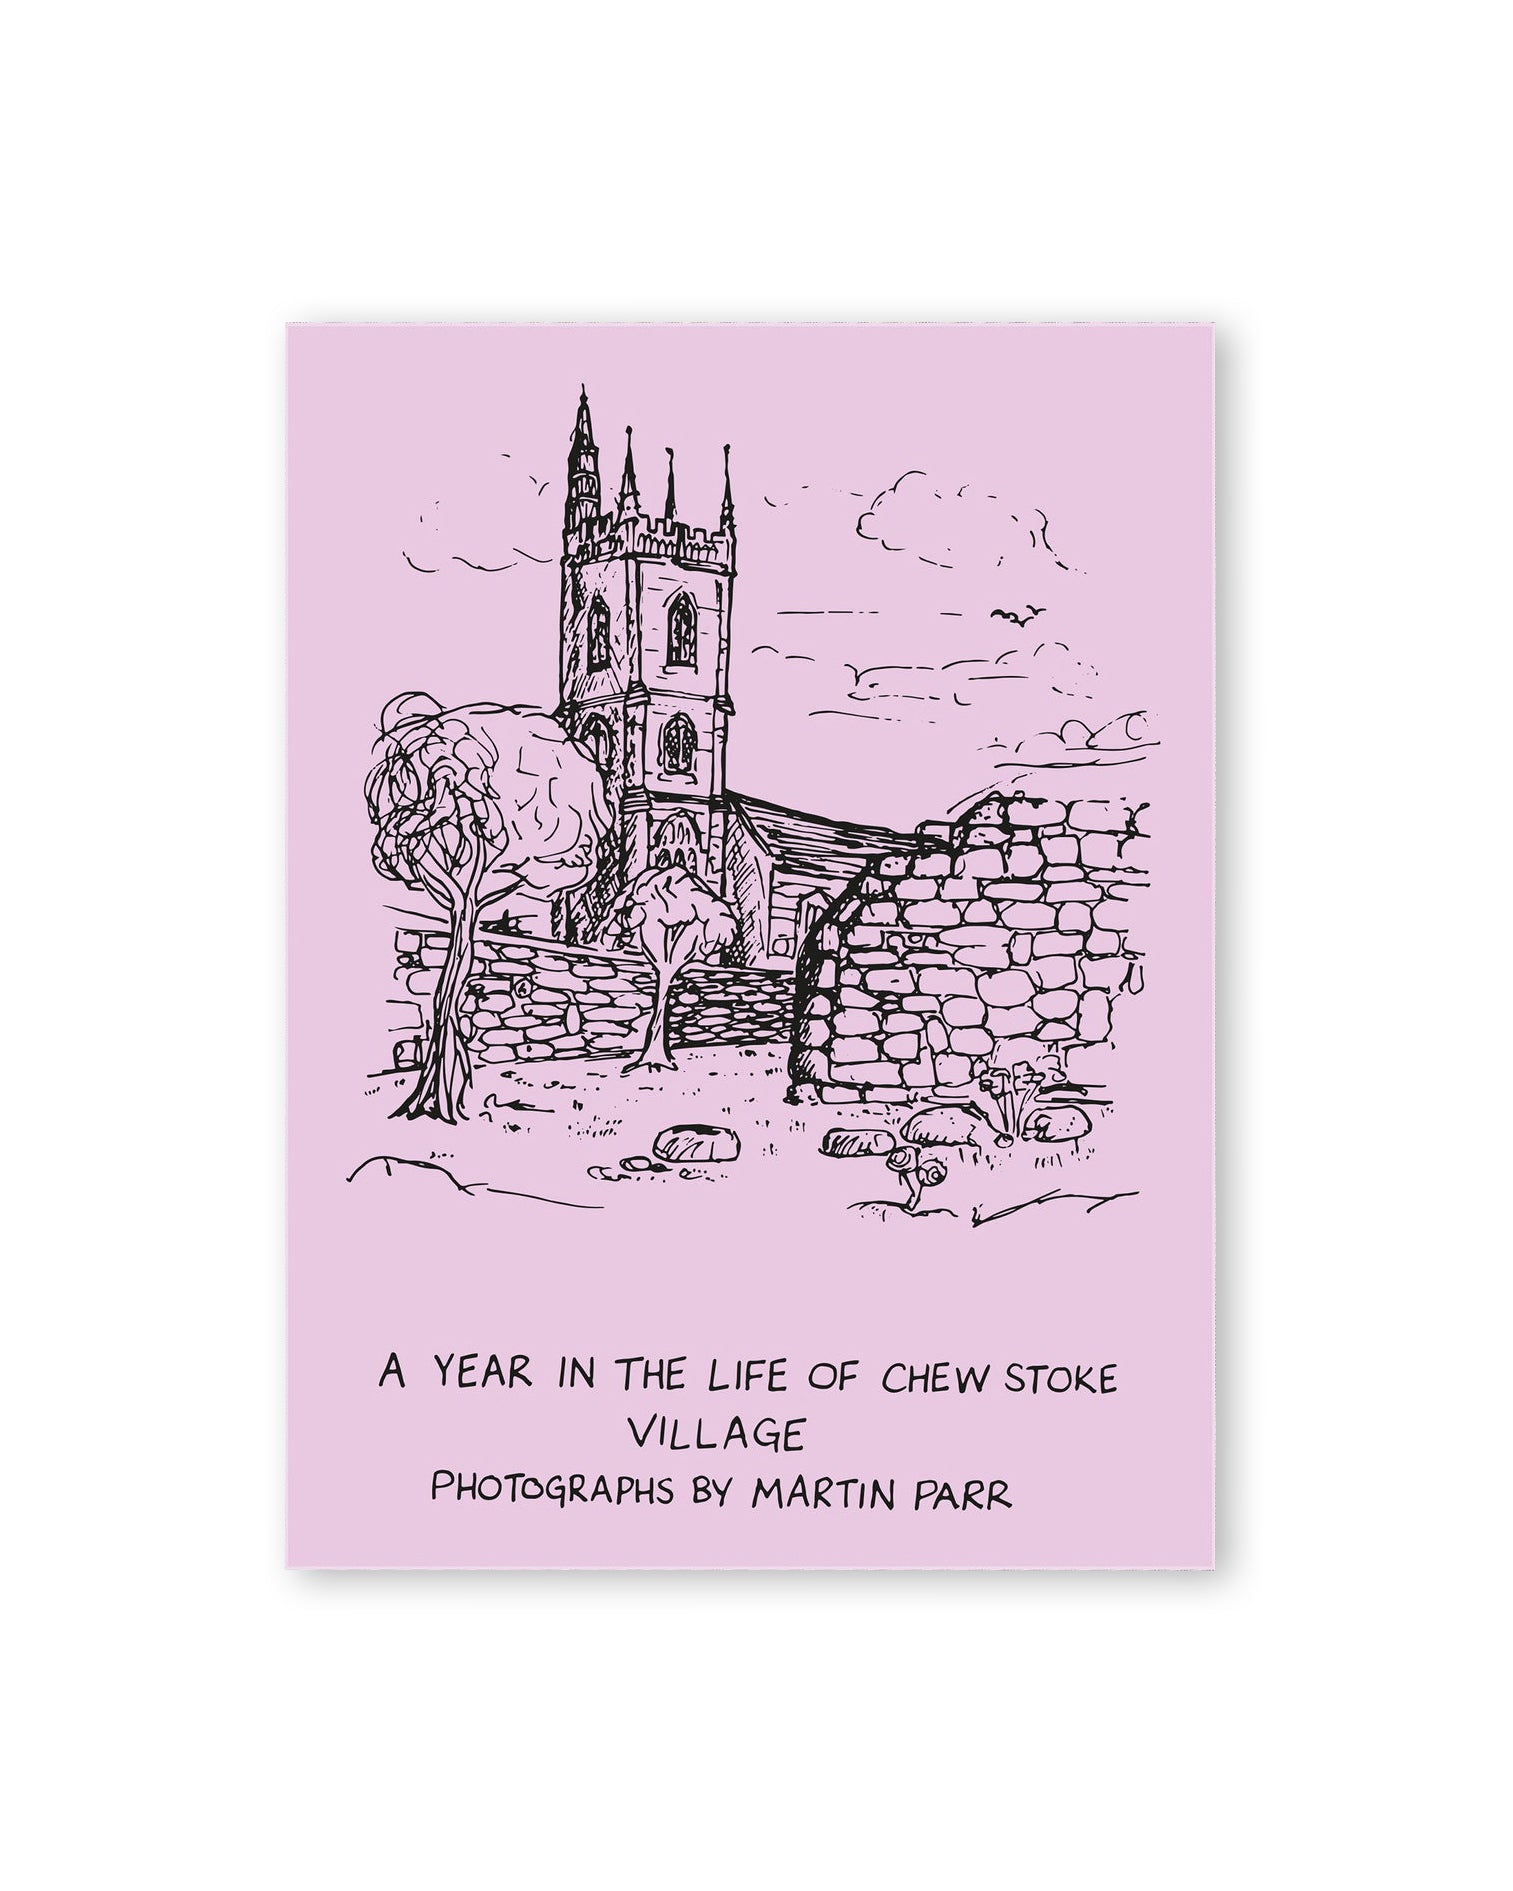 A Year in the Life of Chew Stoke Village